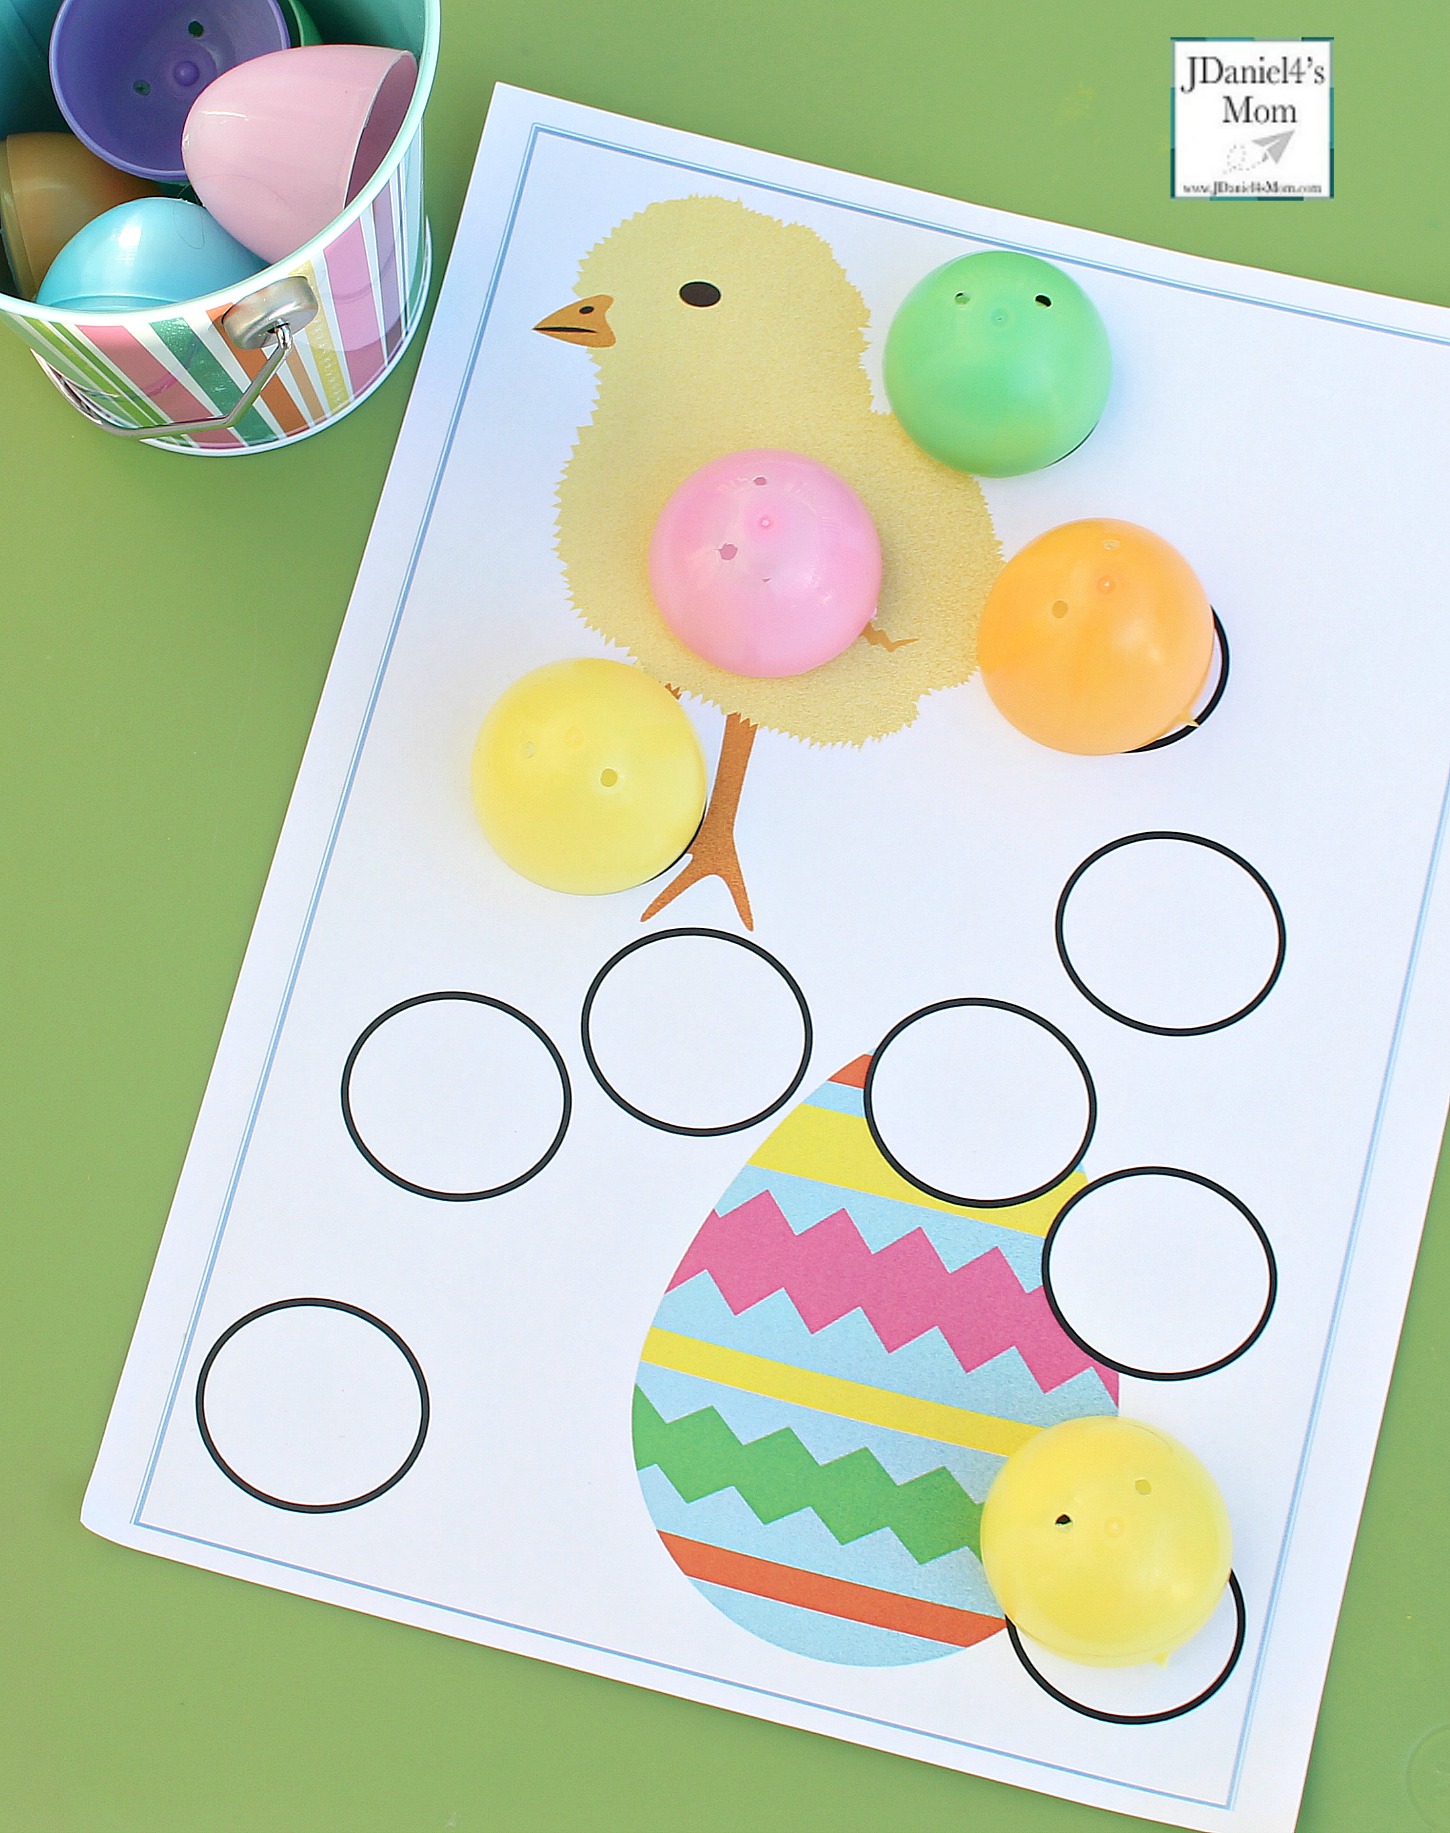 Learning Letters with Plastic Eggs and Printable Mats - Building a Letter